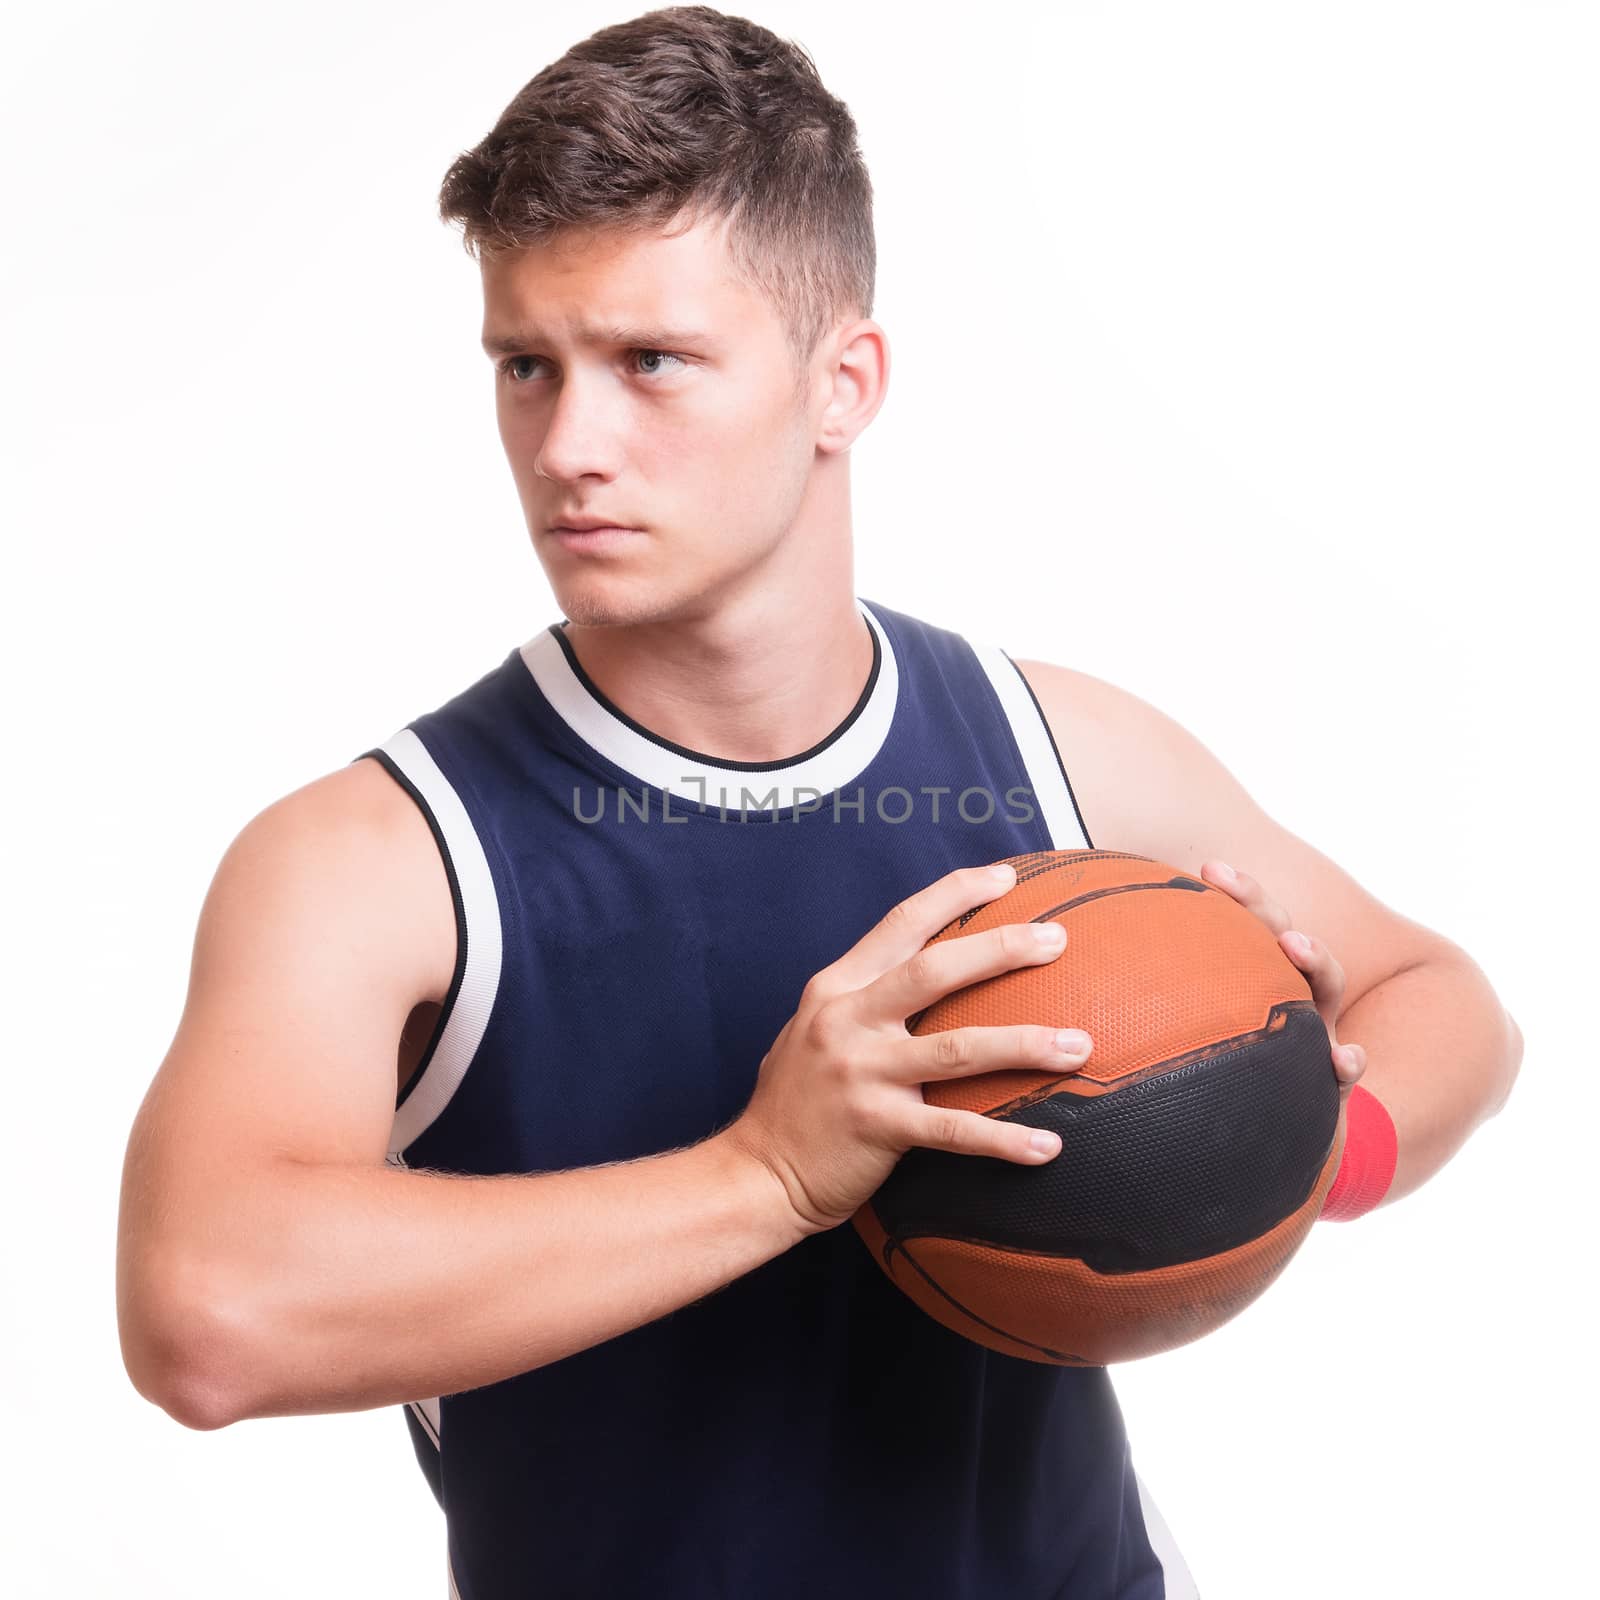 Basketball player with the ball by MichalLudwiczak